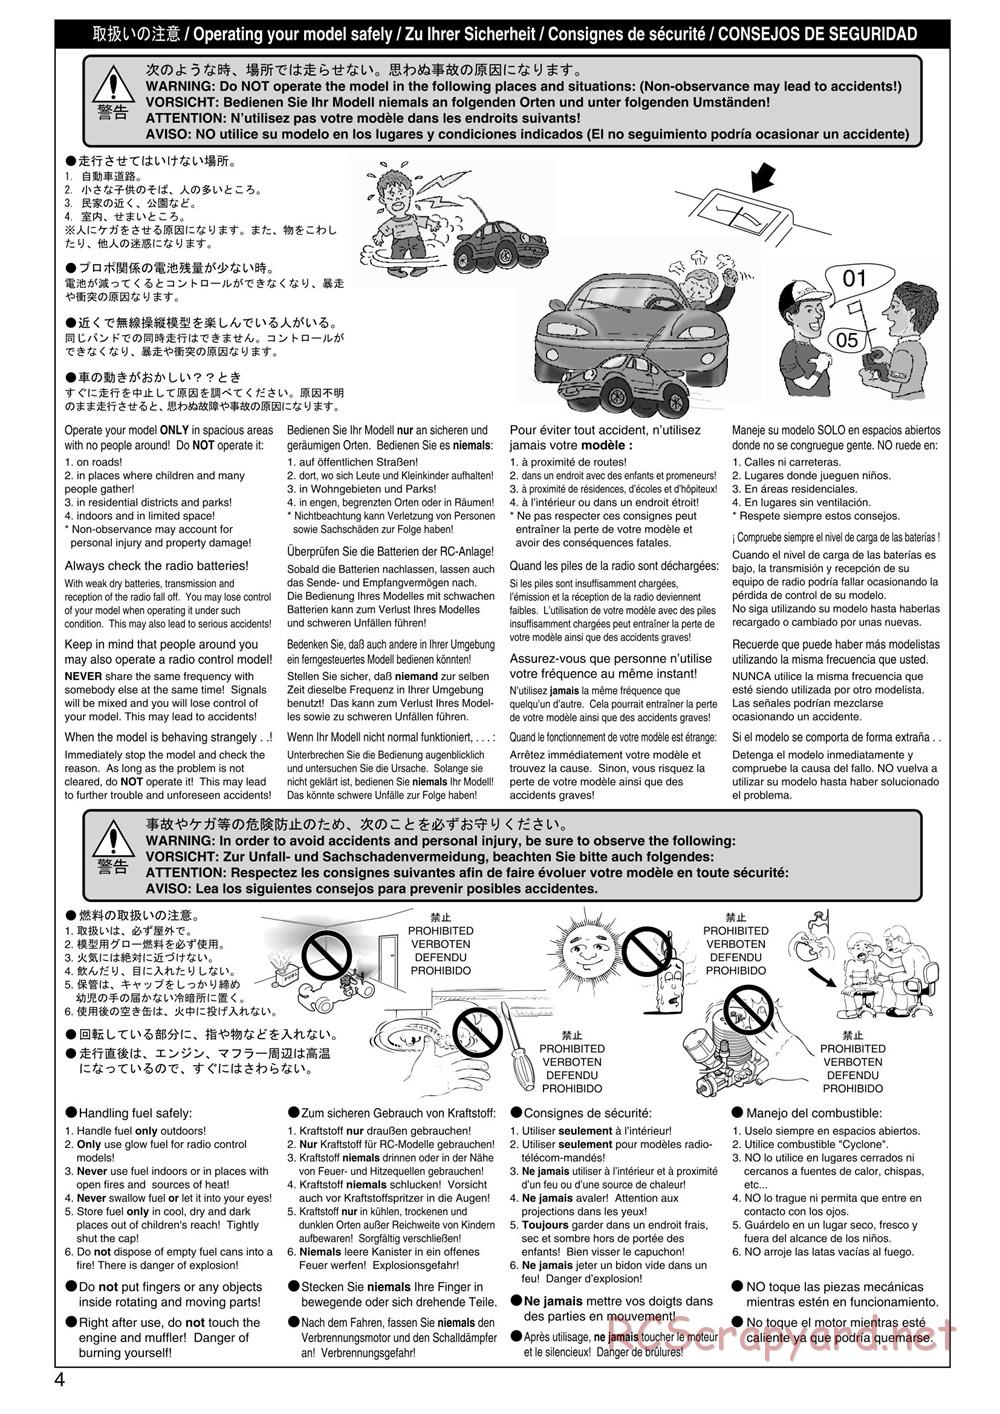 Kyosho - Inferno ST (2005) - Manual - Page 4